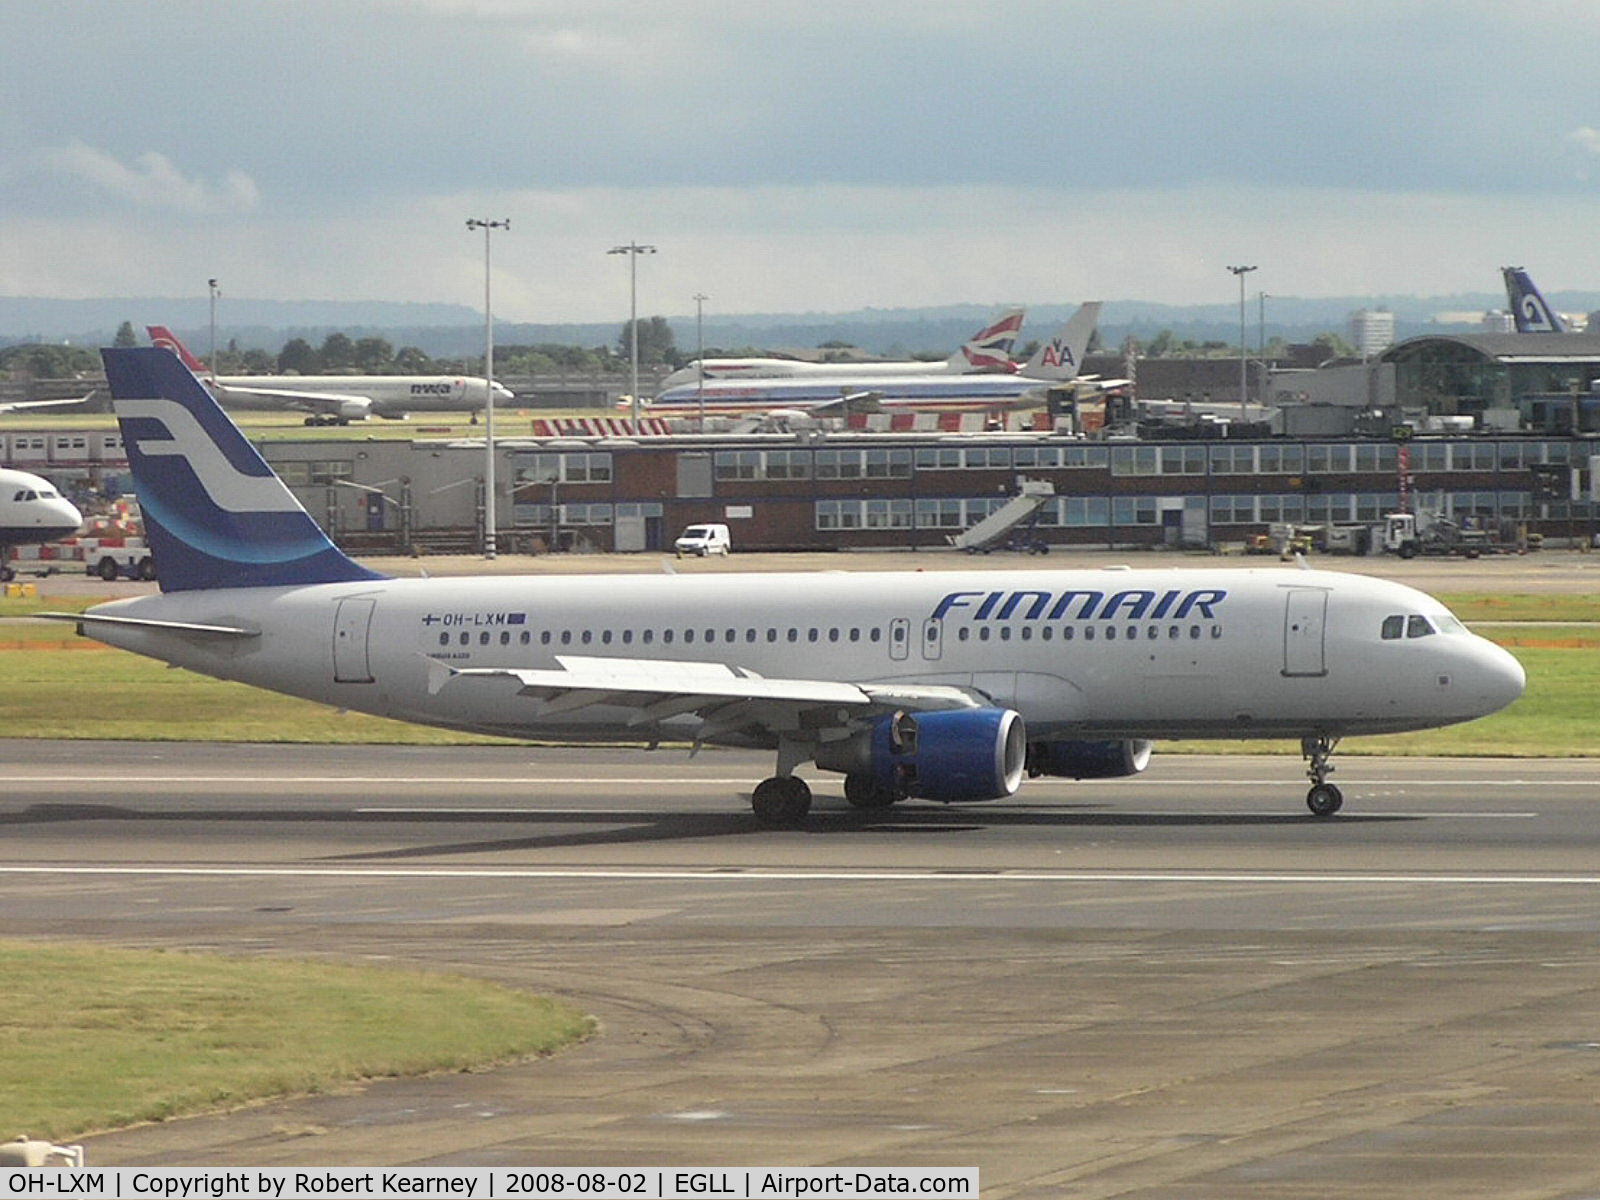 OH-LXM, 2003 Airbus A320-214 C/N 2154, Finnair coming to a stop